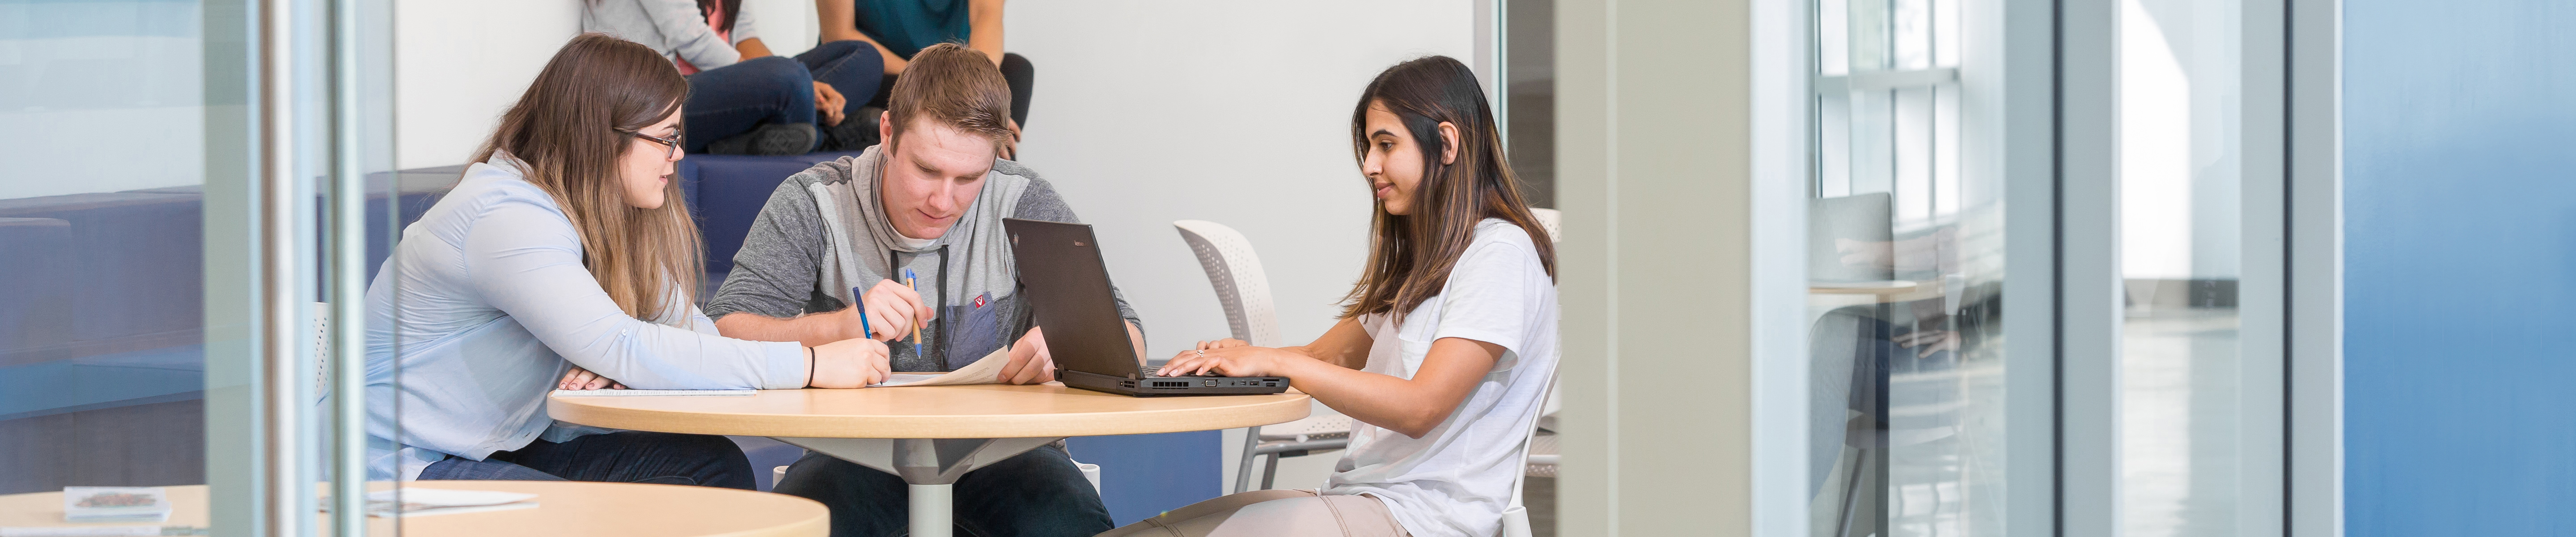 An image of 3 students sitting together with a laptop.